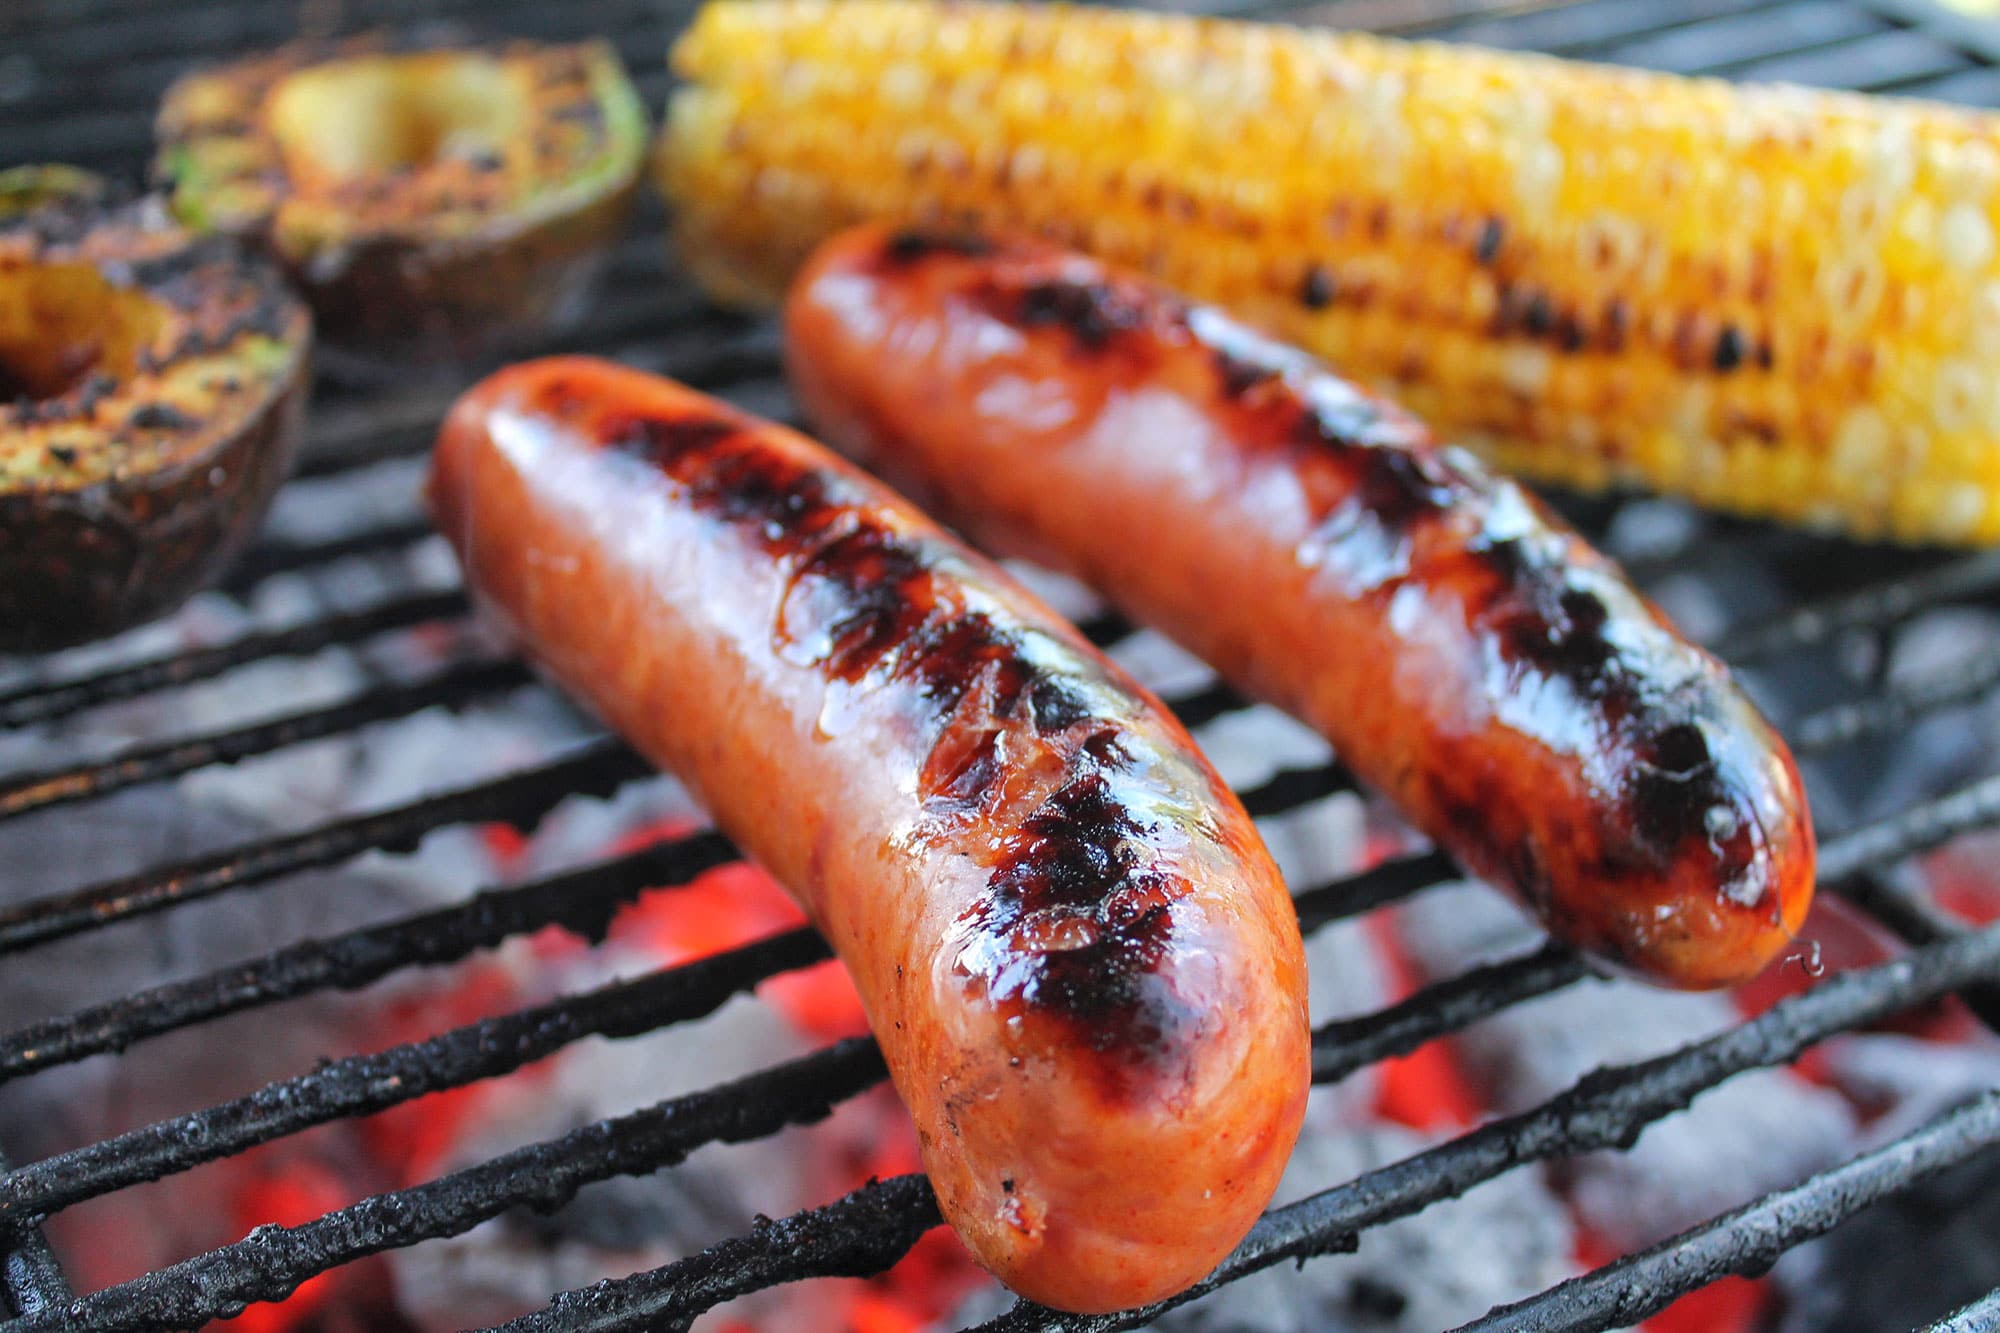 https://evergoodfoods.com/wp-content/uploads/2020/05/Pineapple-Sausages-with-Grill-Roasted-Avocado-and-Sweet-Corn-Guacamole5.jpg